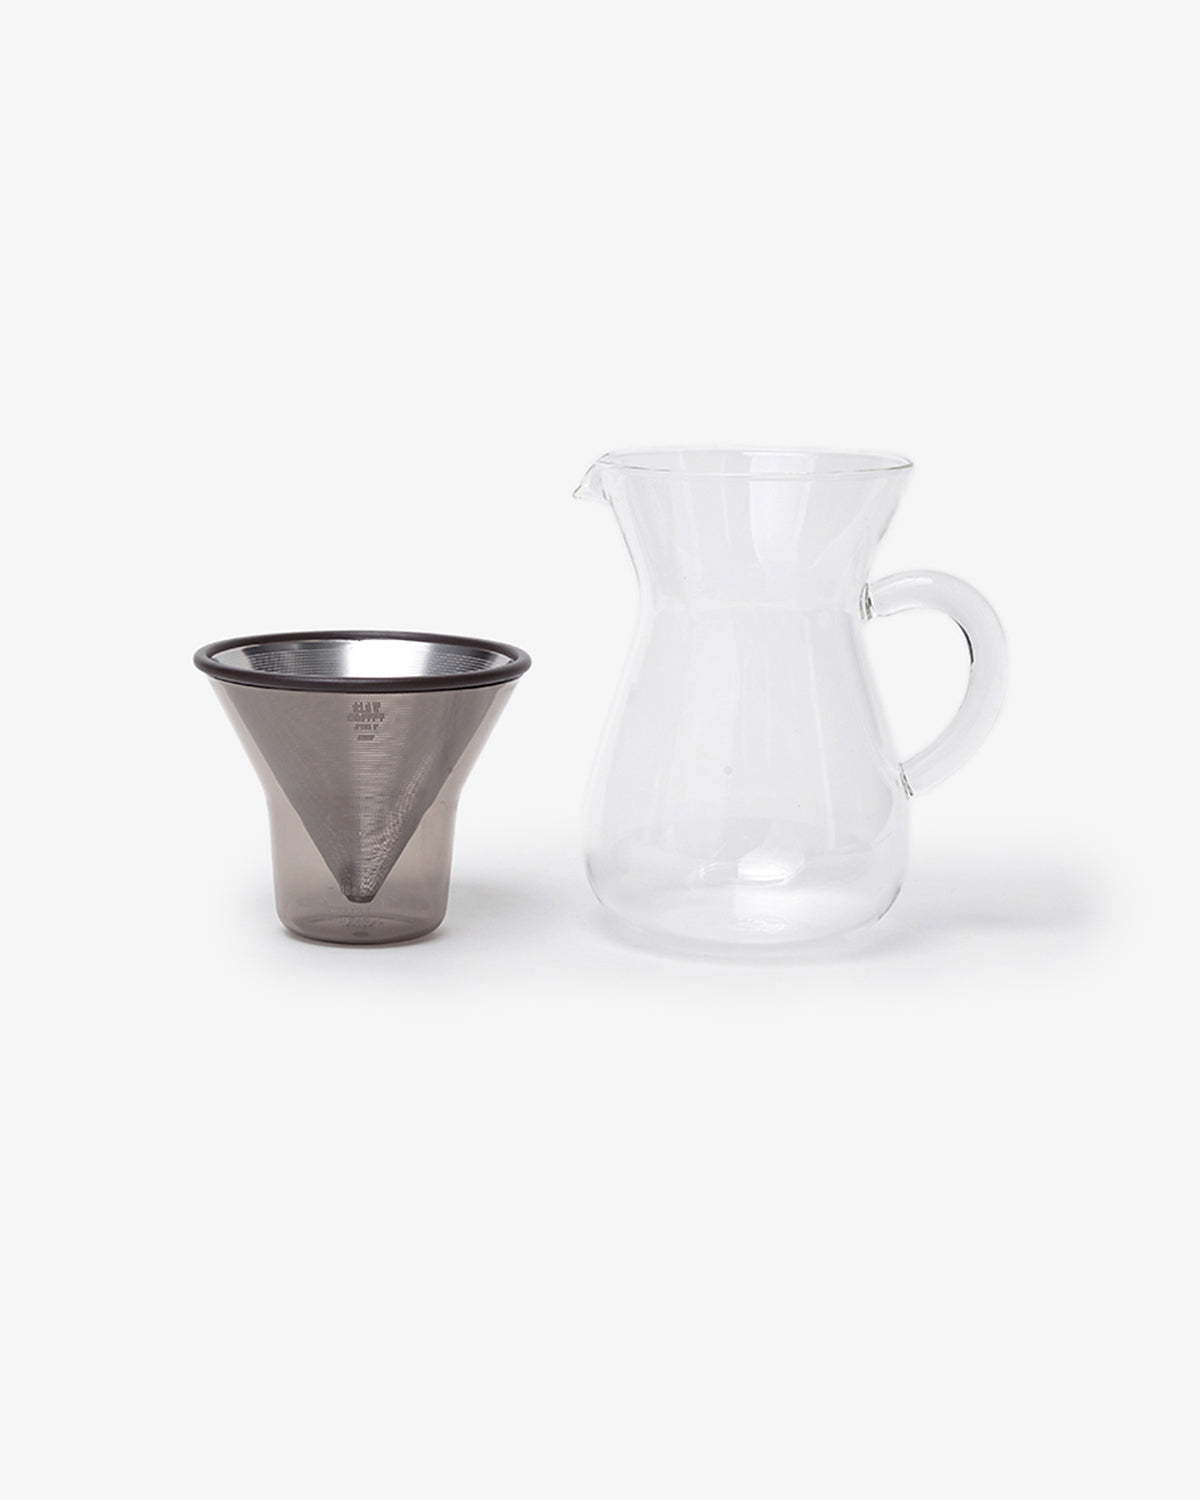 SLOW COFFEE STYLE COFFEE CARAFE SET 2CUPS